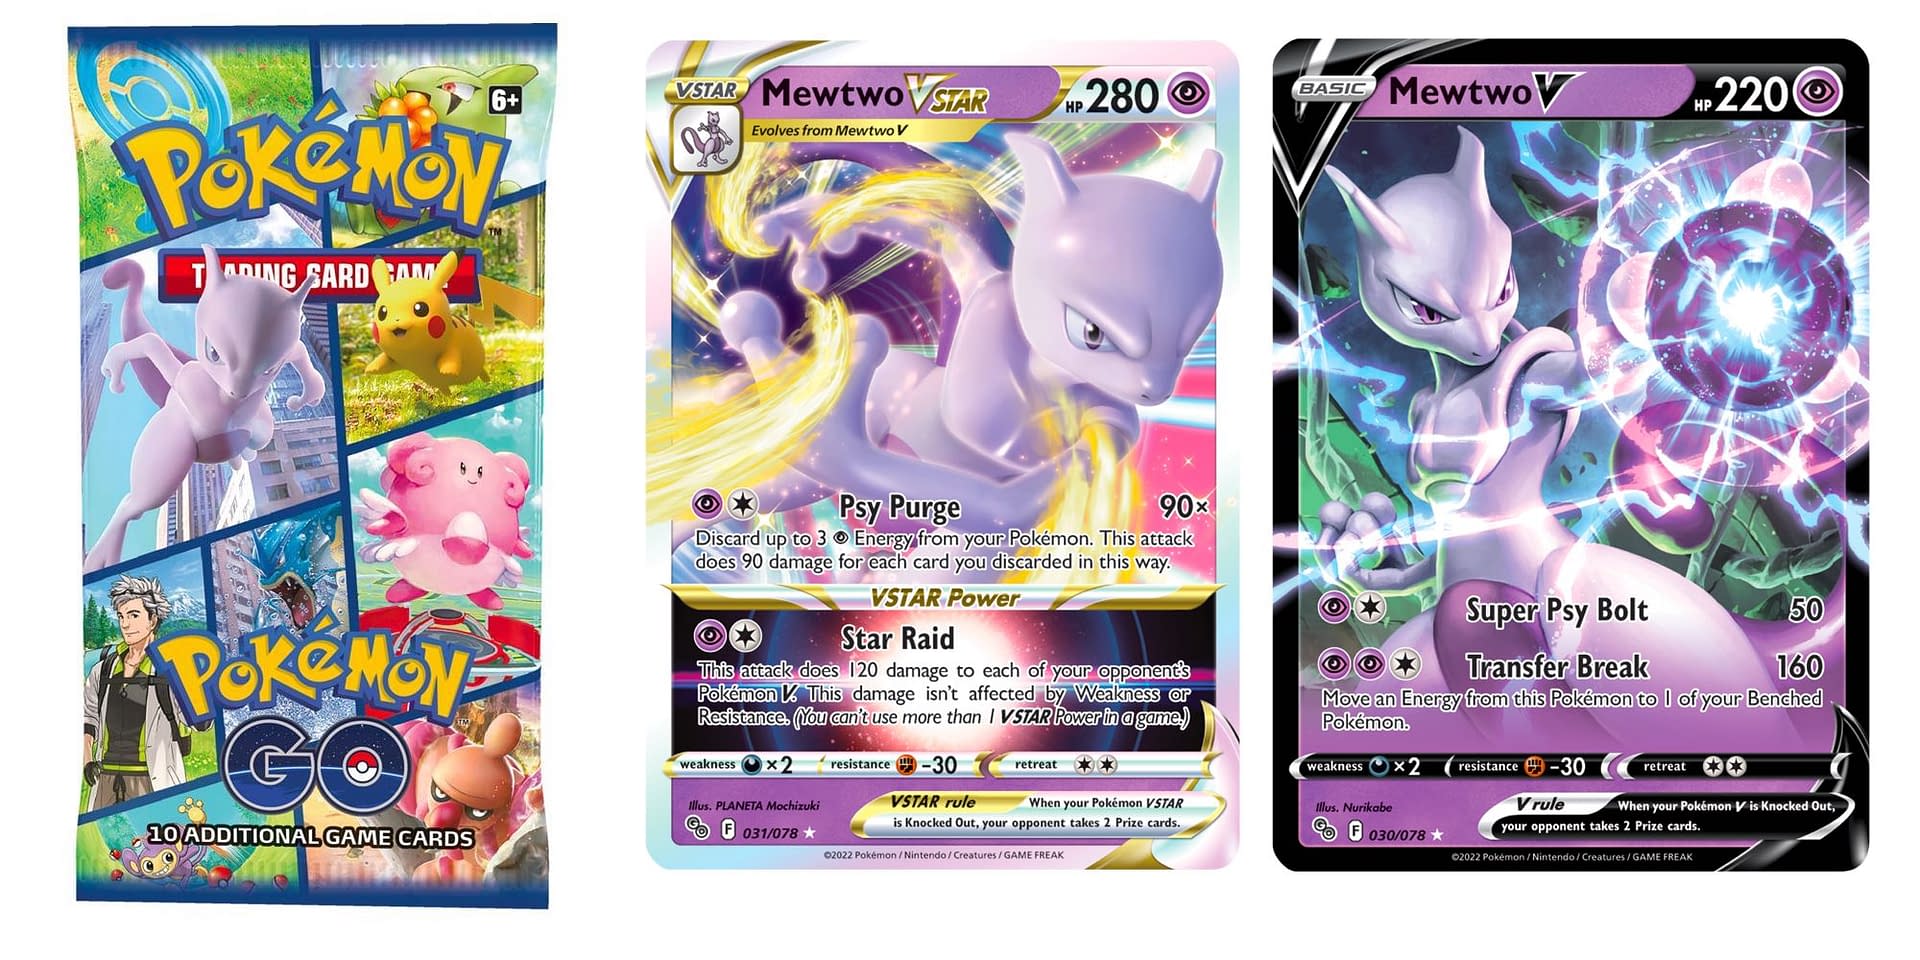 At 8 types of ultra beast#pokemon #Red #pokemoncards #Ash #Mewtwo #Mew